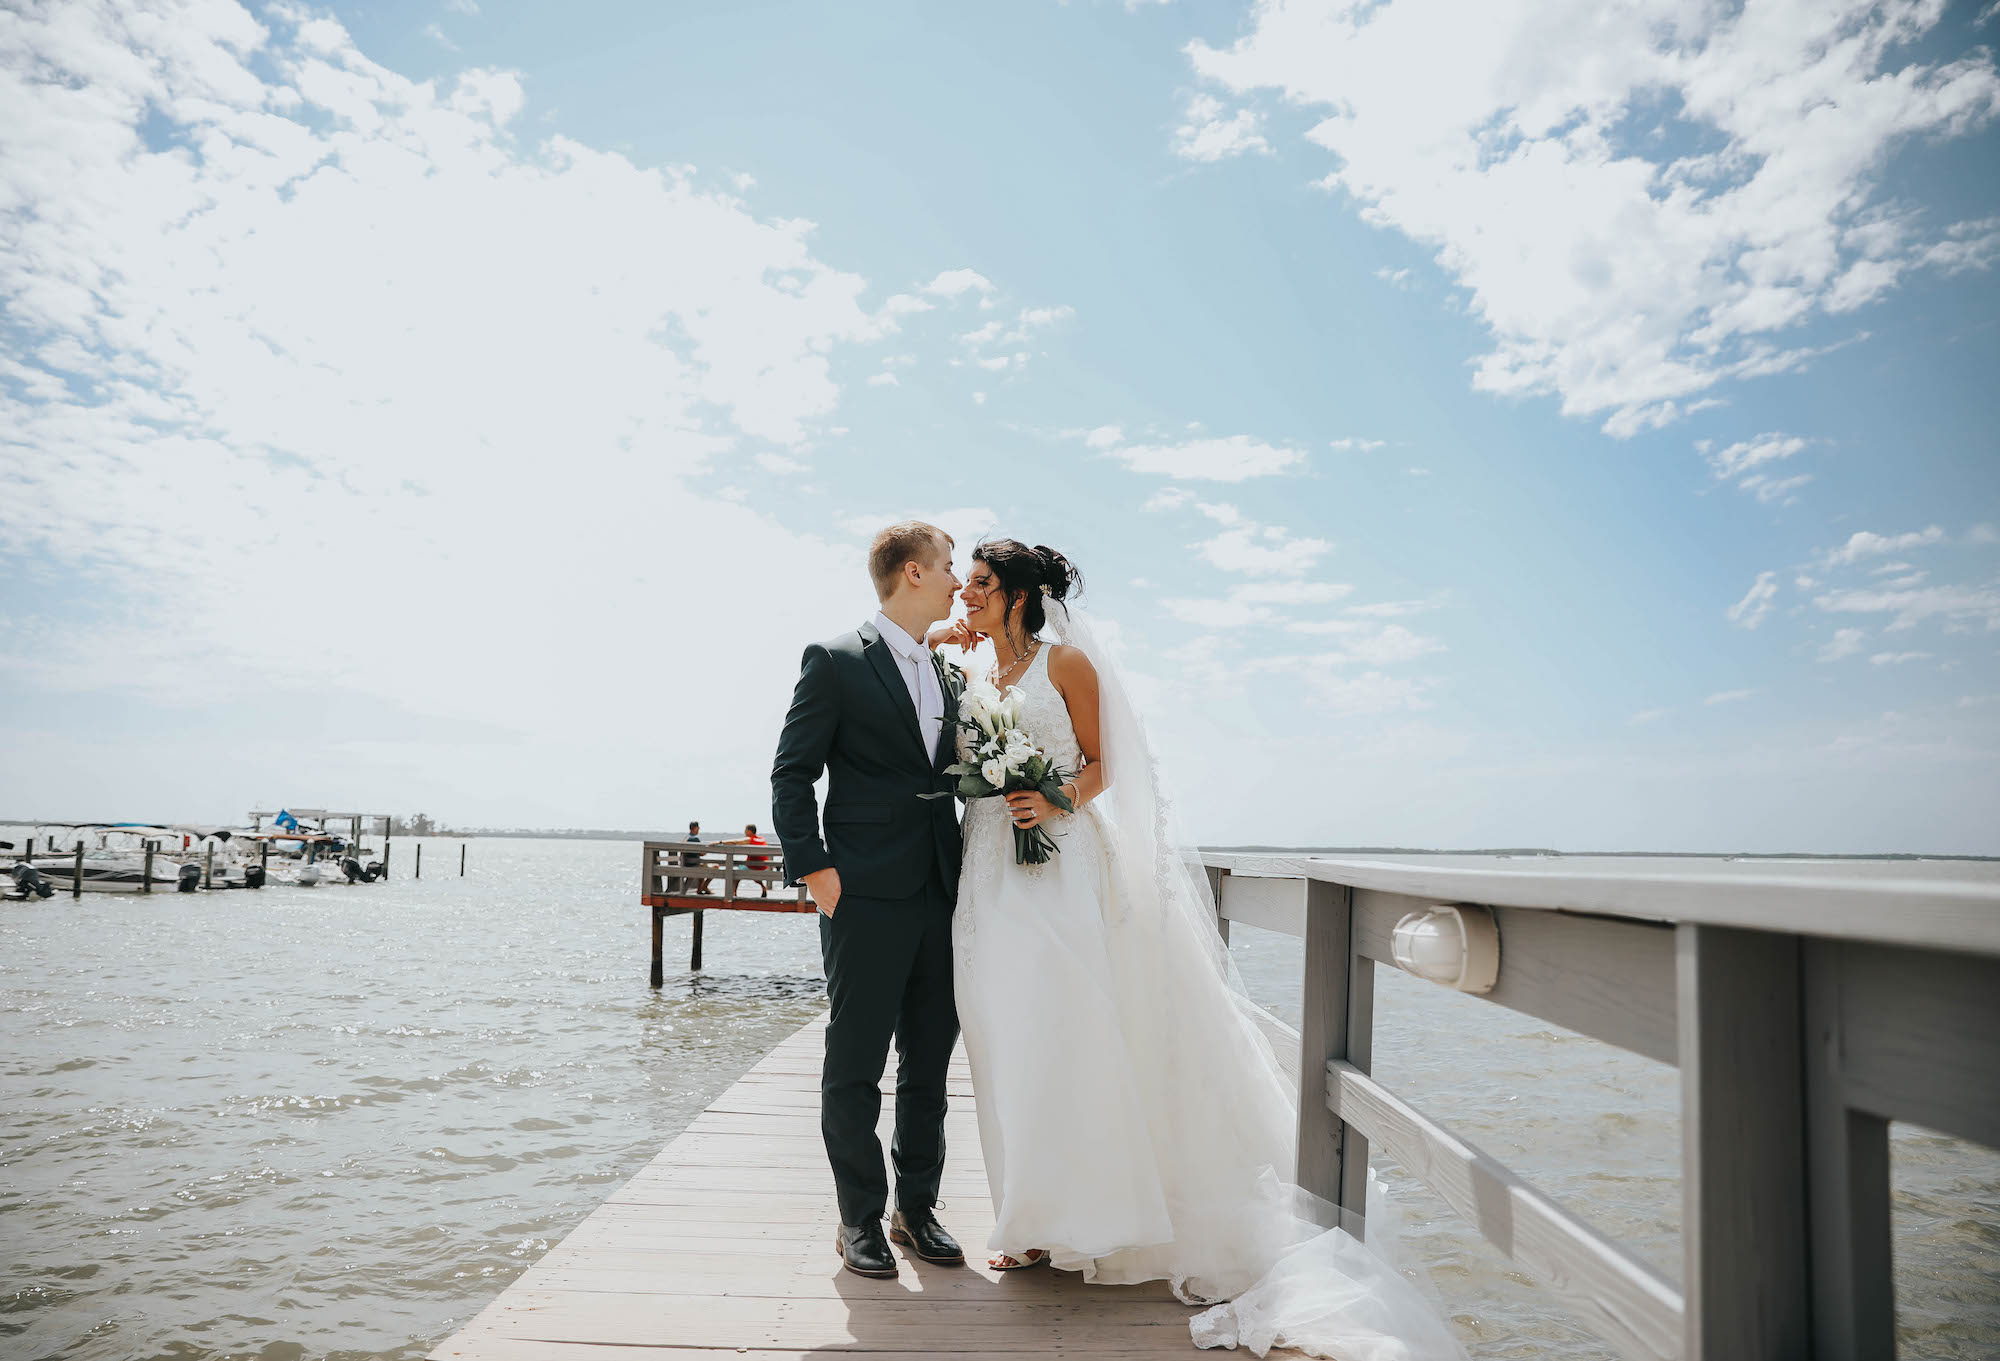 Florida Bride and Groom Wedding Portraits on Waterfront Private Pier in Dunedin, Holding Greenery Inspired Bridal Bouquet with White Flowers | Tampa Bay Wedding Florist Brides N Blooms | Clearwater Wedding Venue Beso Del Sol Resort